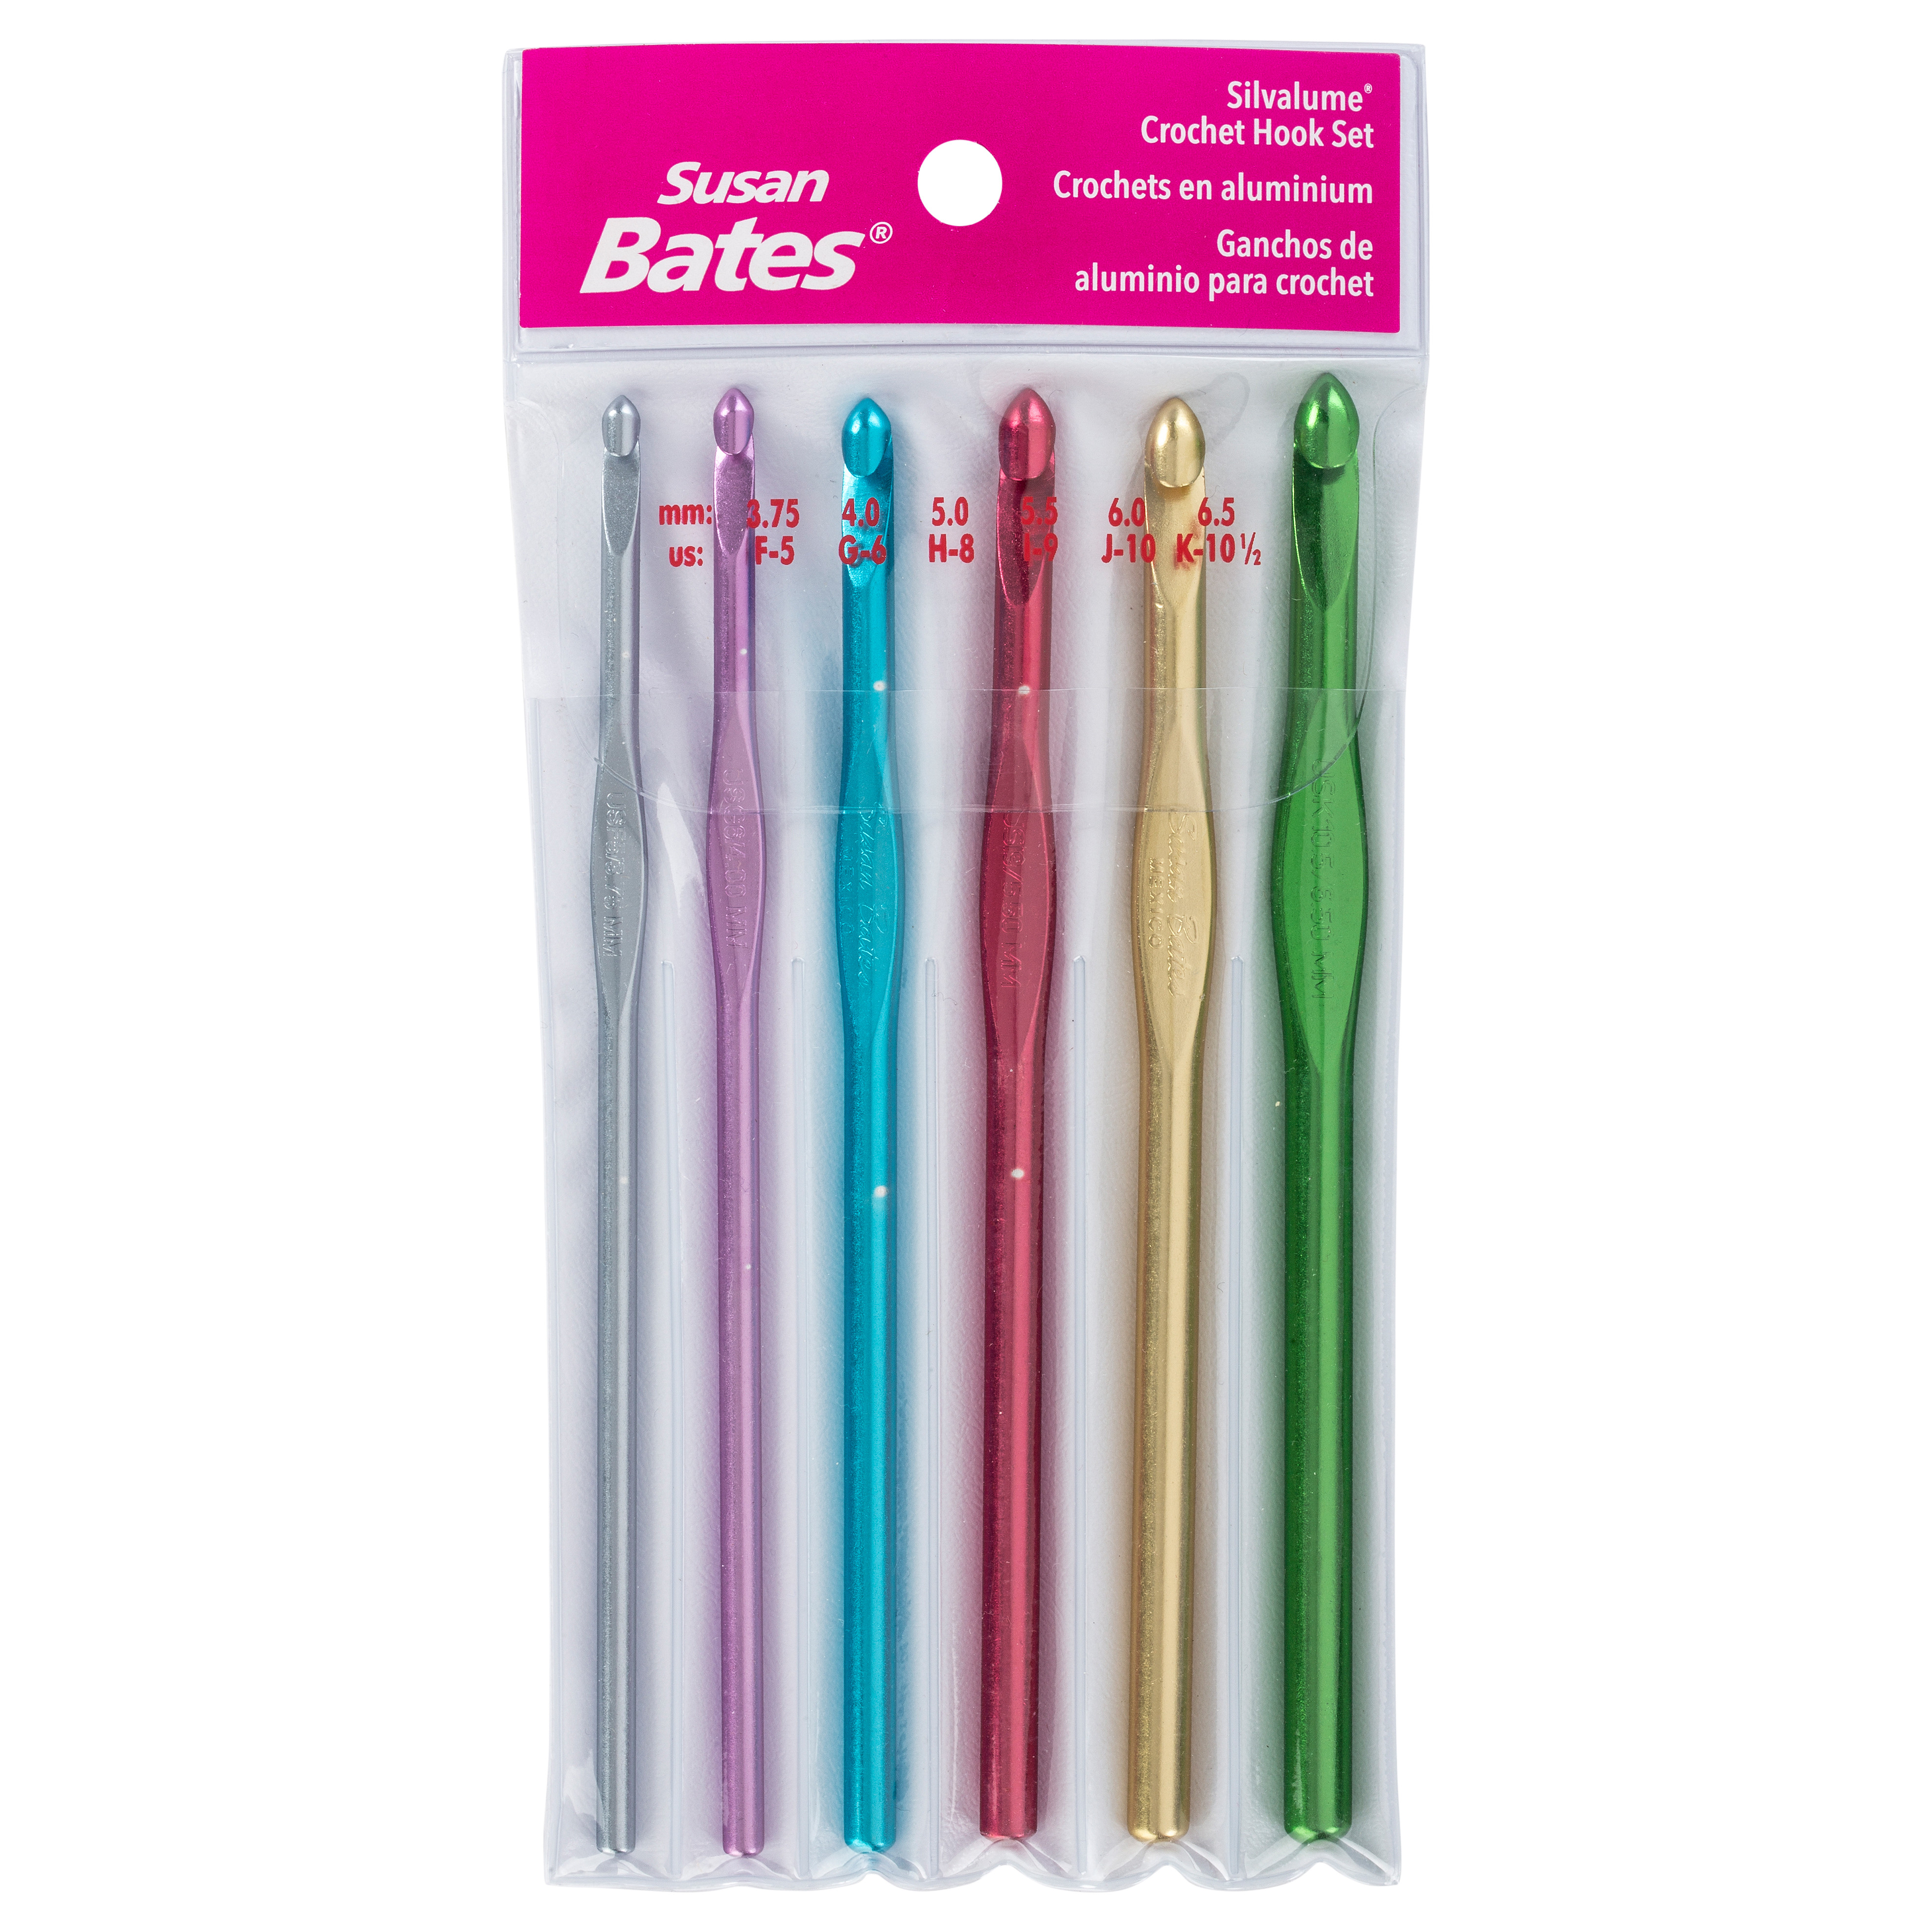 Susan Bates Silvalume Aluminum Crochet Hook Set with Pouch, Assorted Size, Set of 6 - image 1 of 3